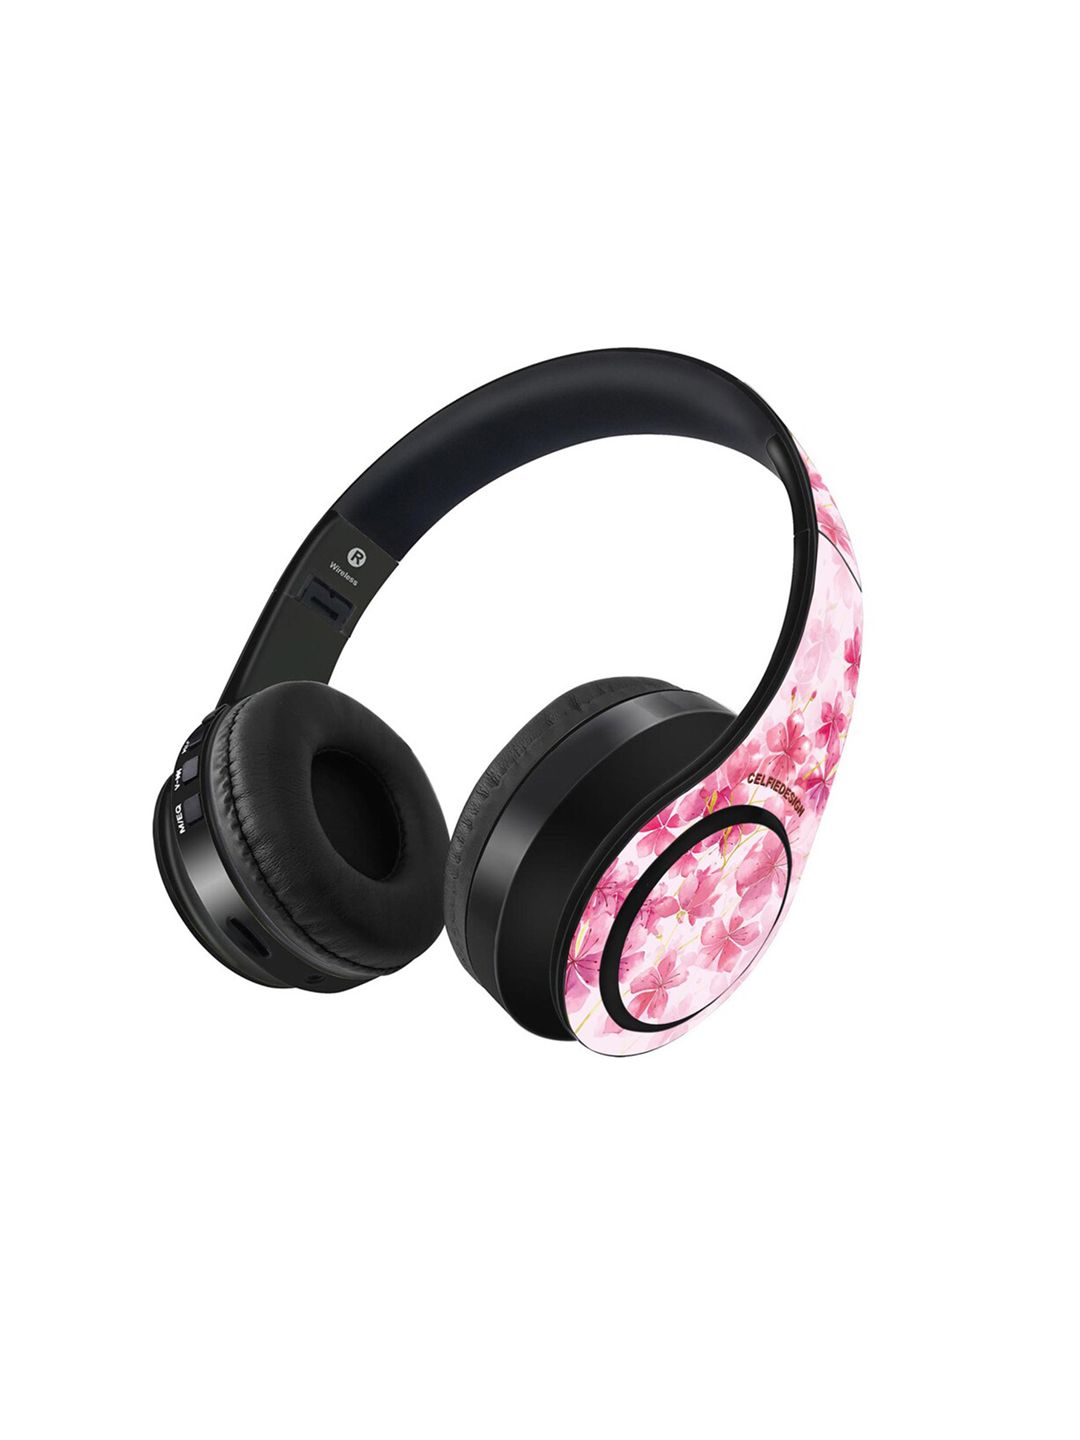 CelfieDesign Black & Pink Cherry Blossom Bluetooth WirelessOnEarHeadphones9Hrs Battery&Mic Price in India